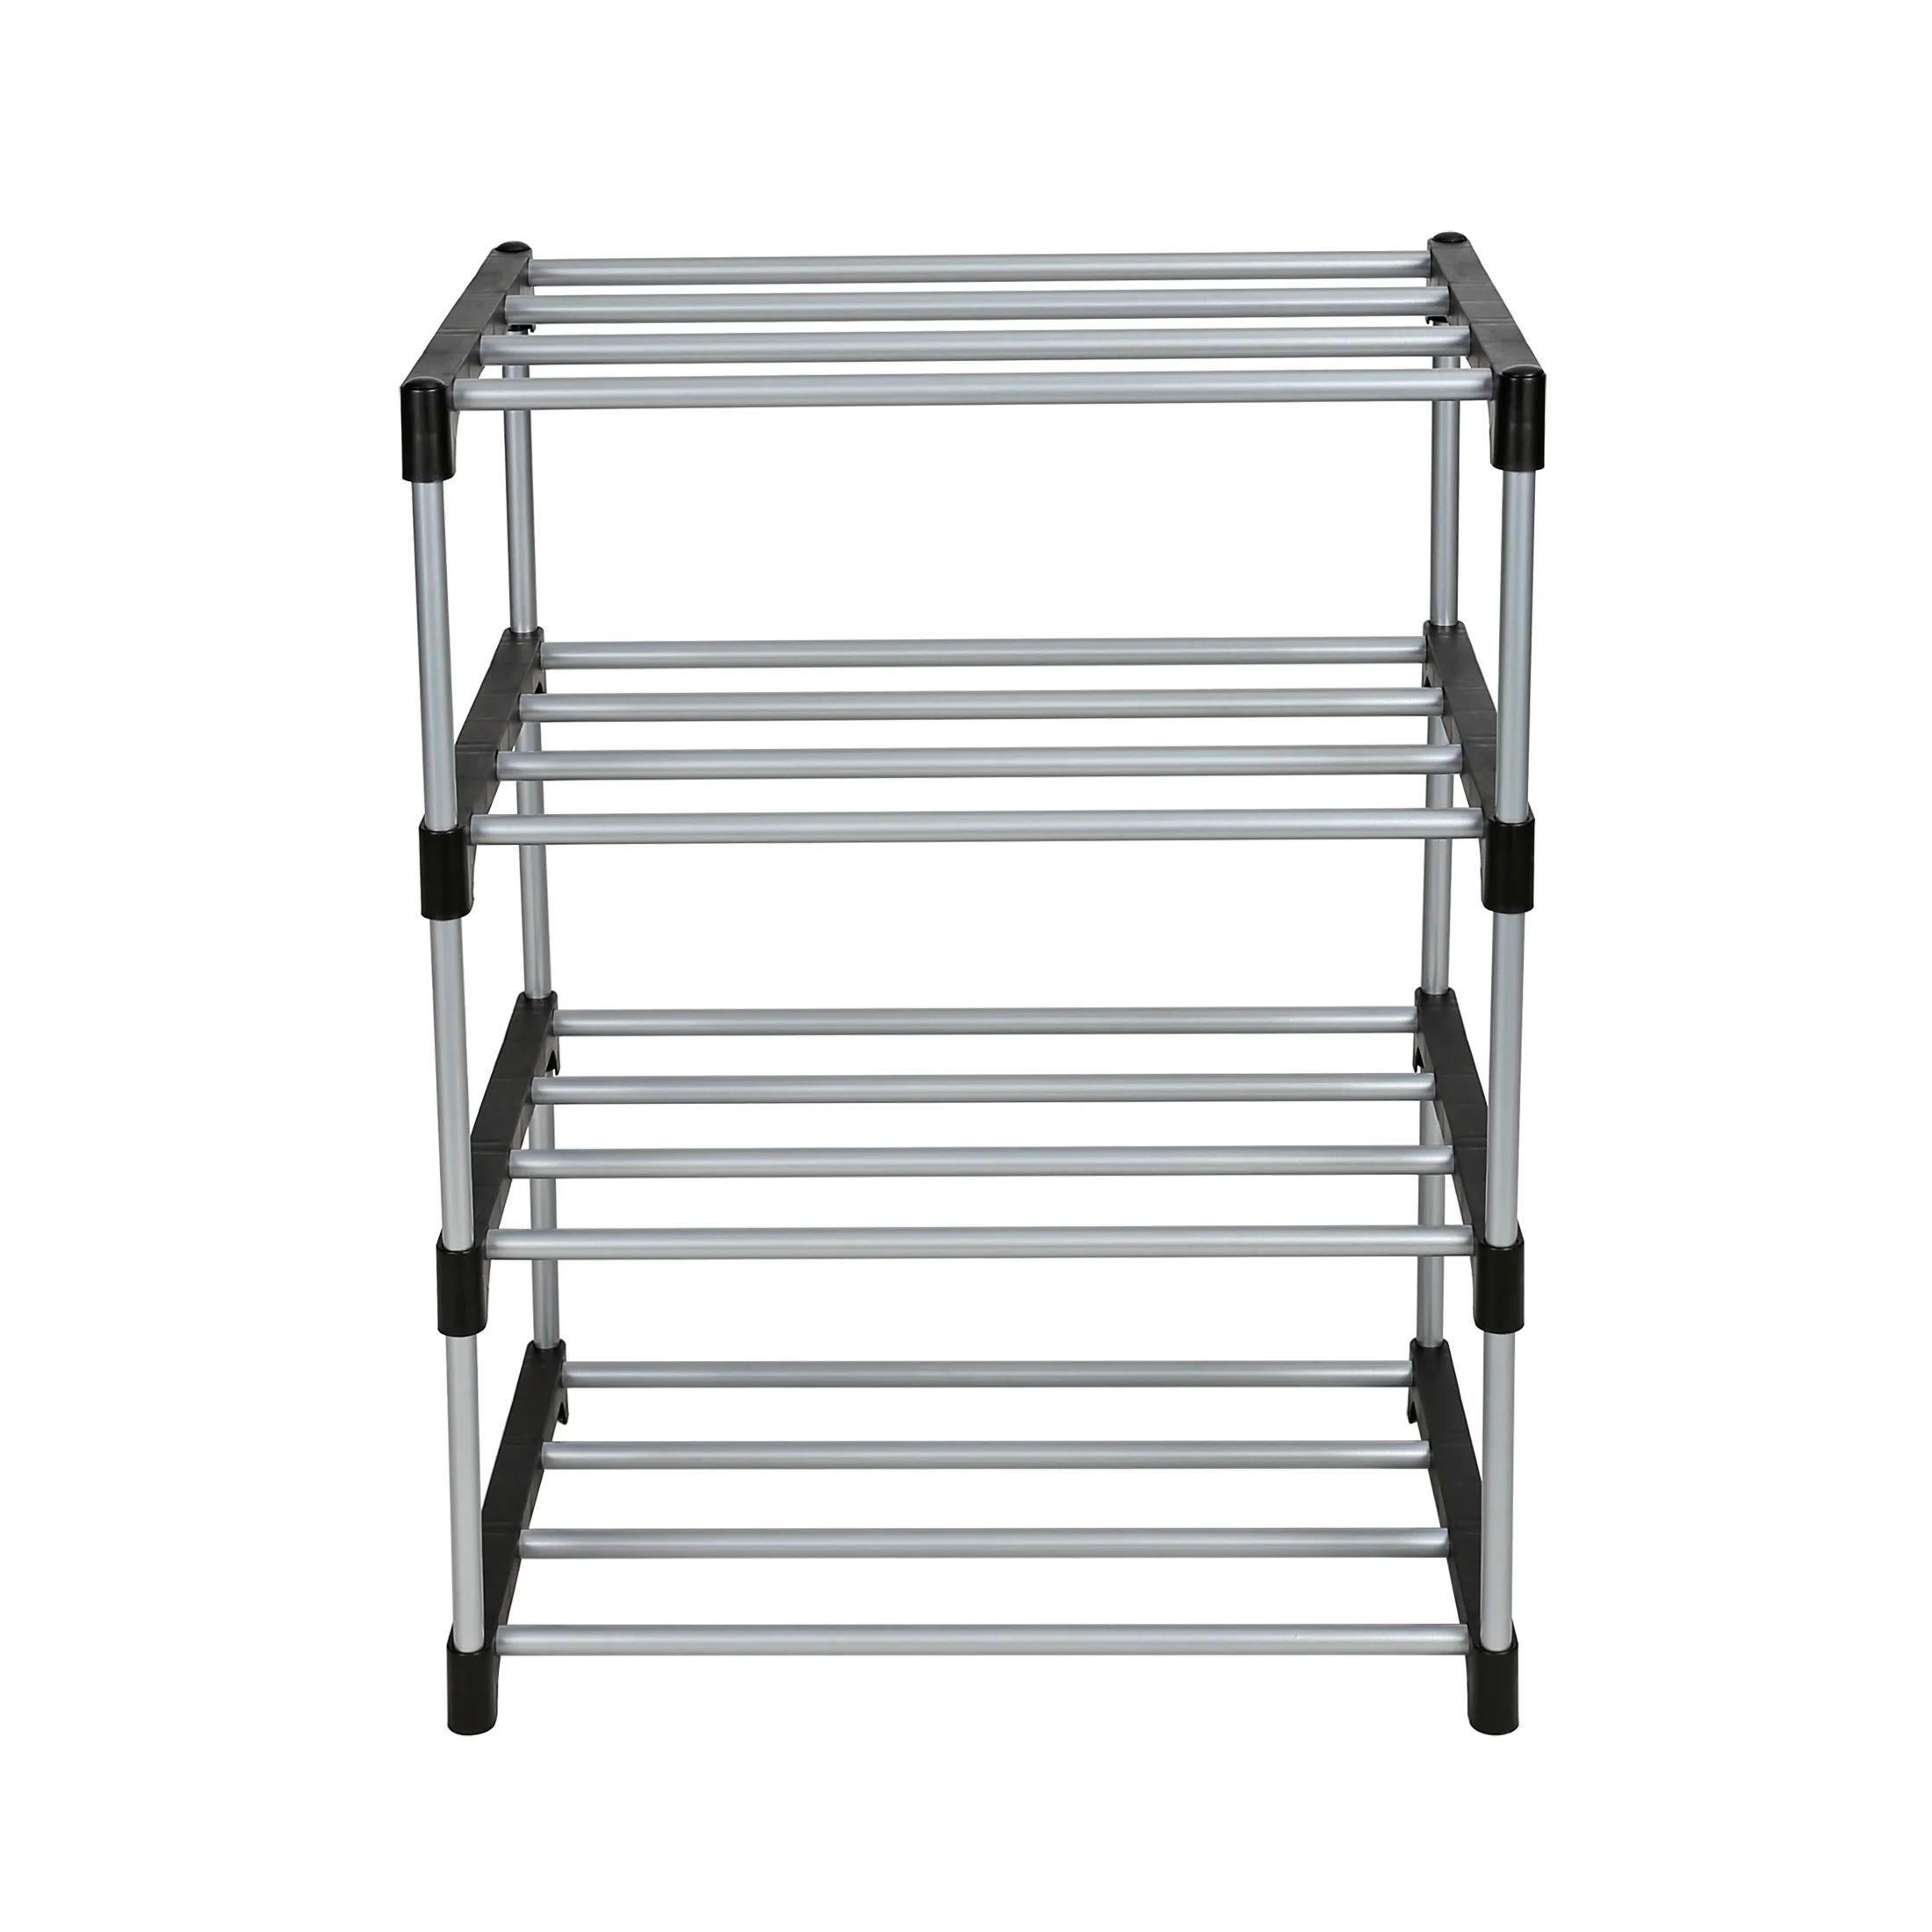 Mainstays 4 Tier Shoe Rack, Black and Silver, 8 Pairs of Shoes, Metal Tubes & Plastic Connectors | Walmart (US)